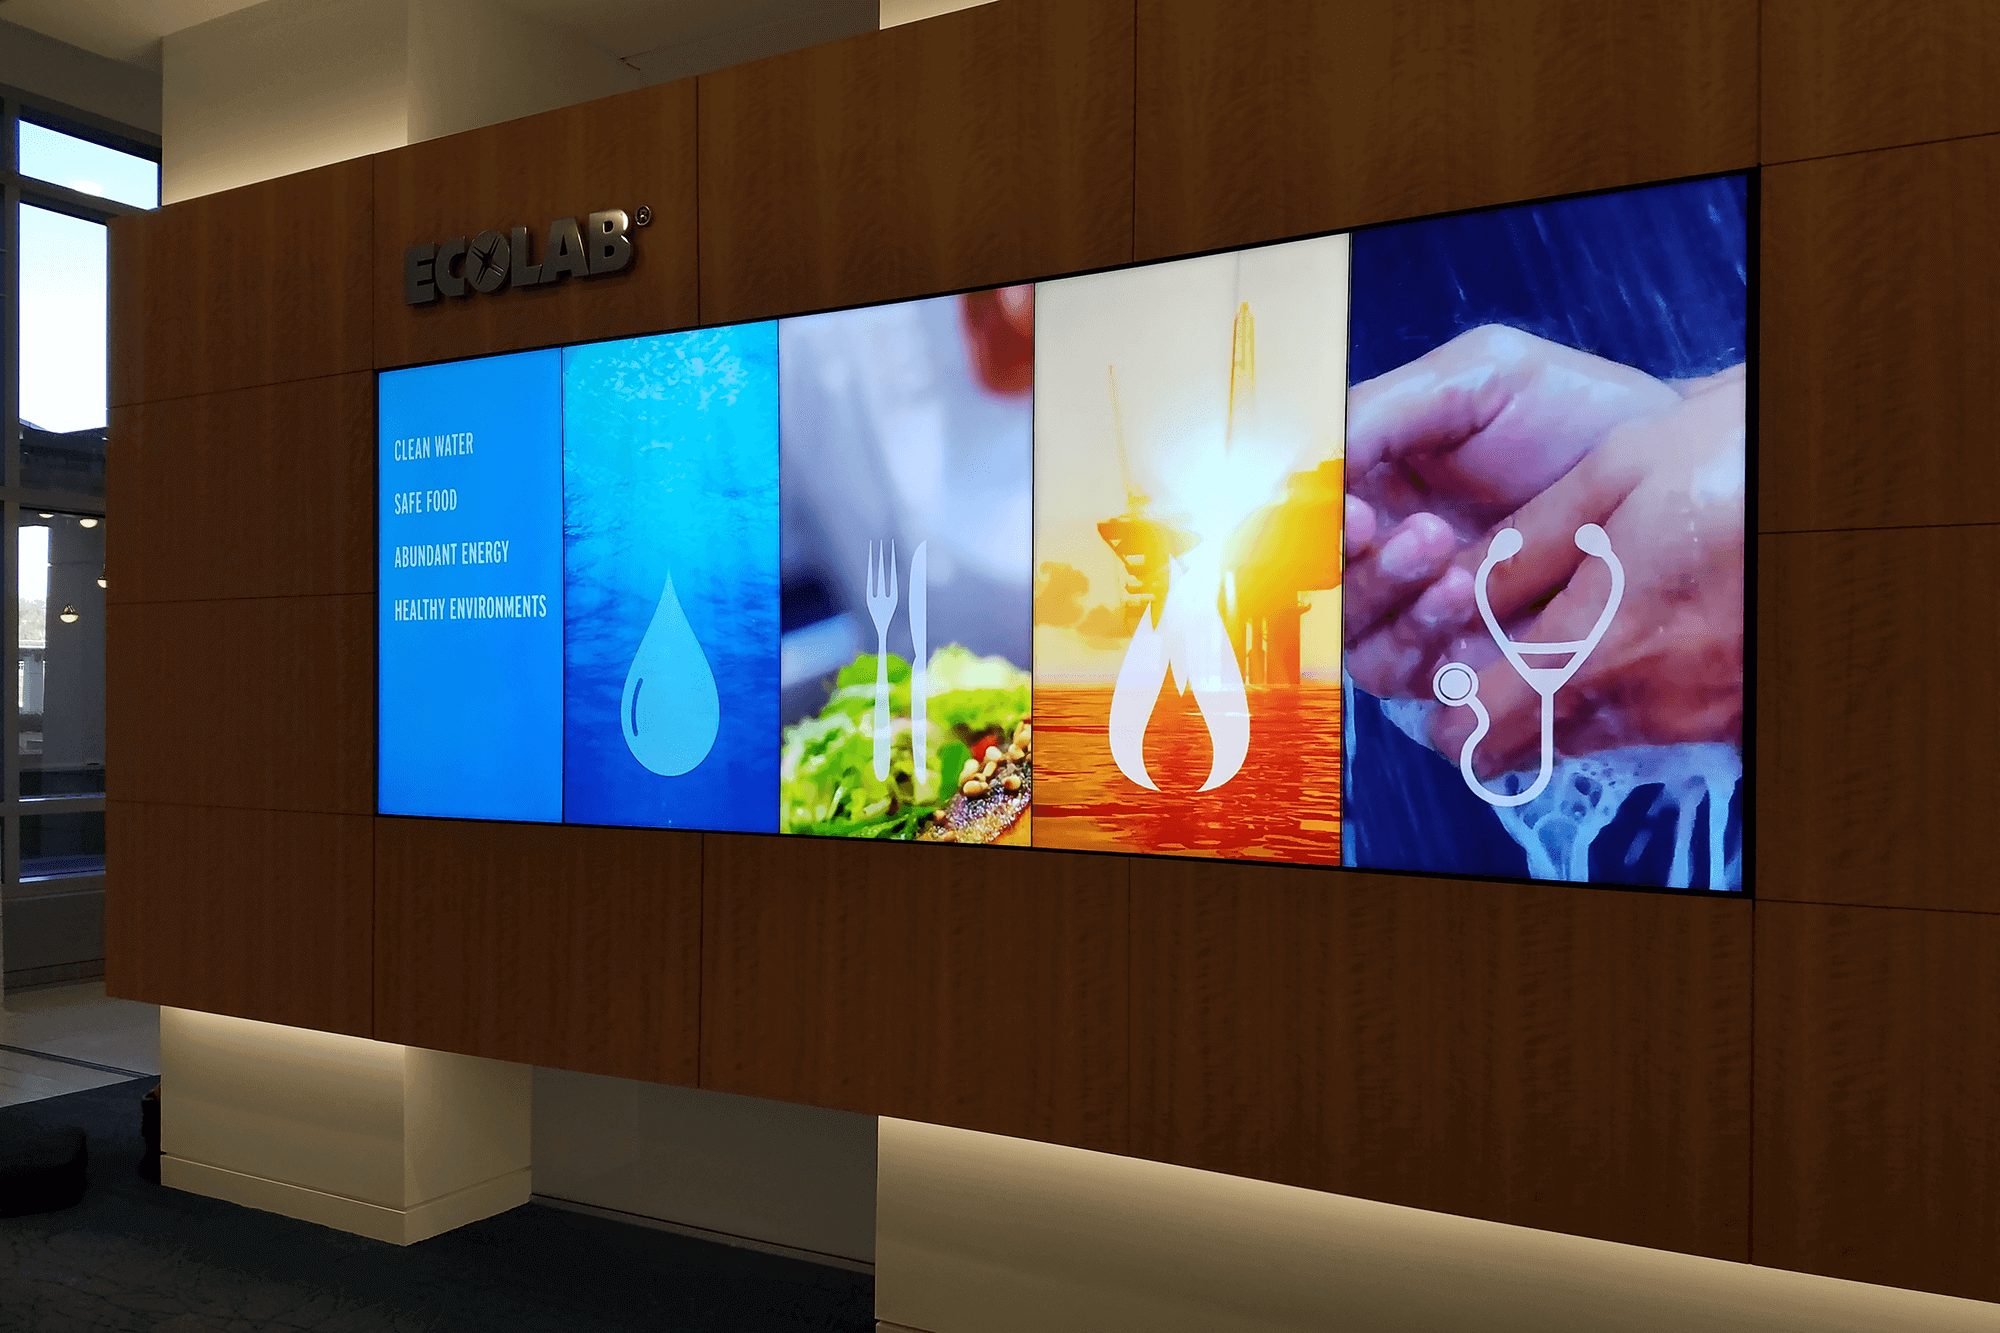 Colorful digital video wall being displayed at the Ecolab office